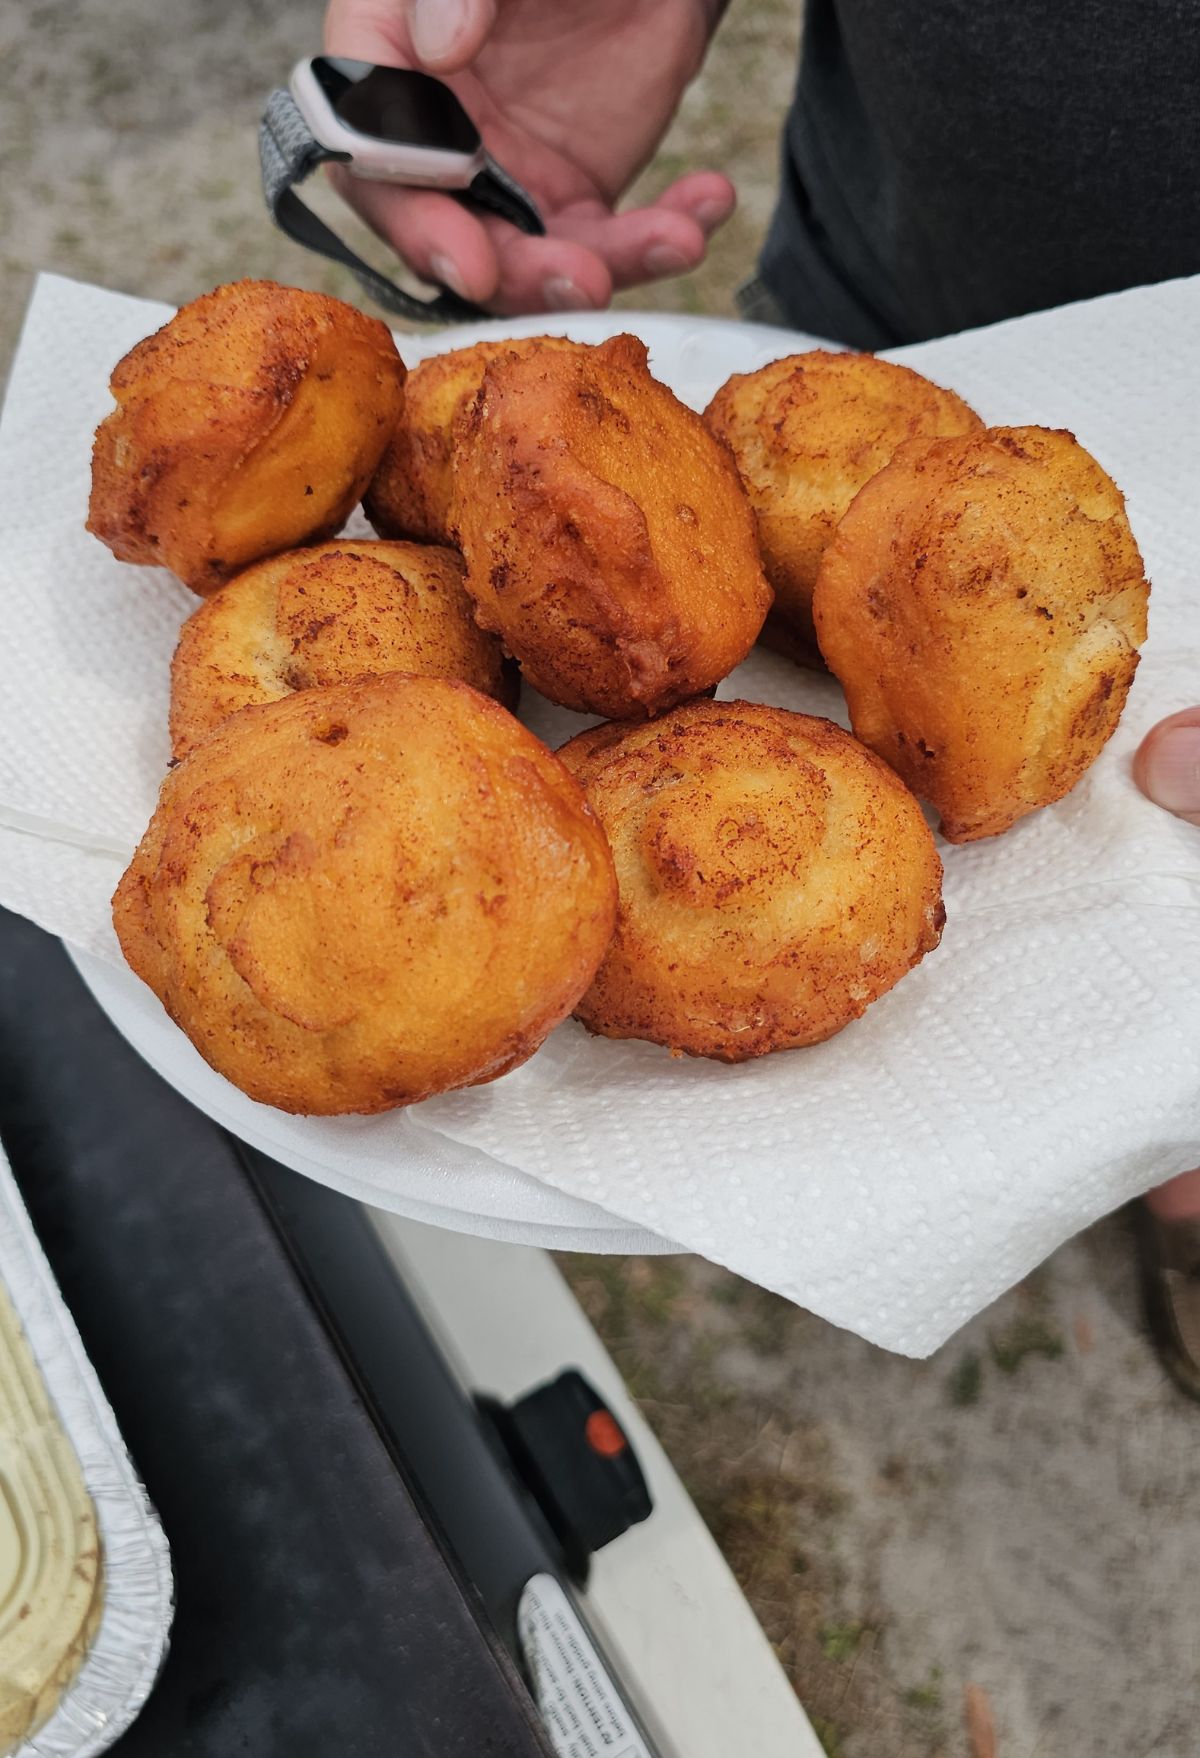 A person holding a plate of golden-brown fried muffins.